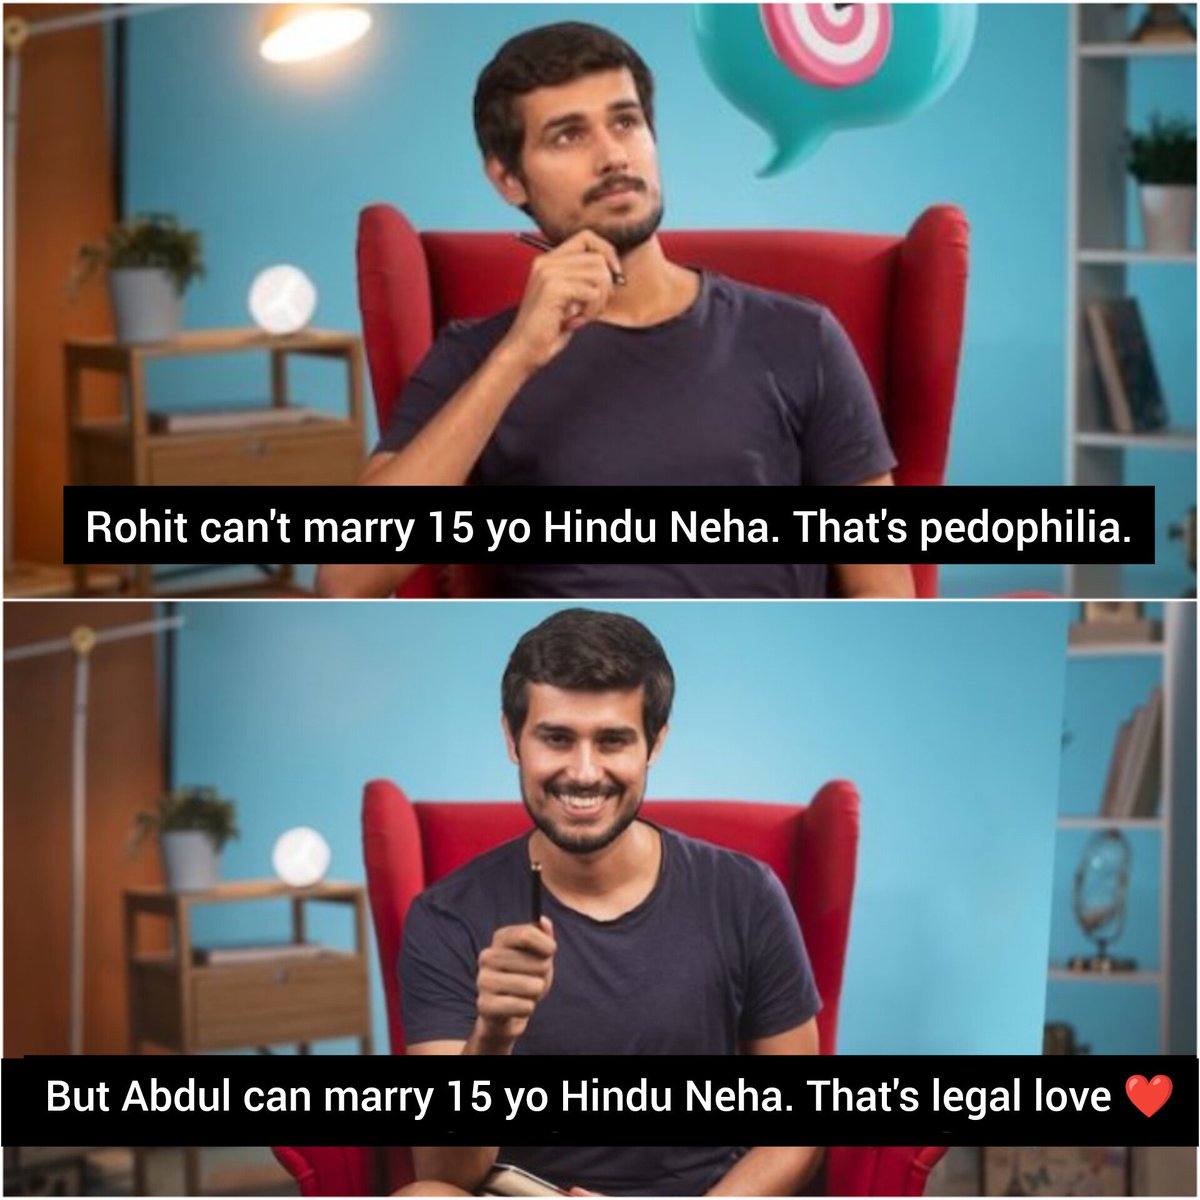 He will never make this video. So I did.
#DhruvRathee #LoveJihaad